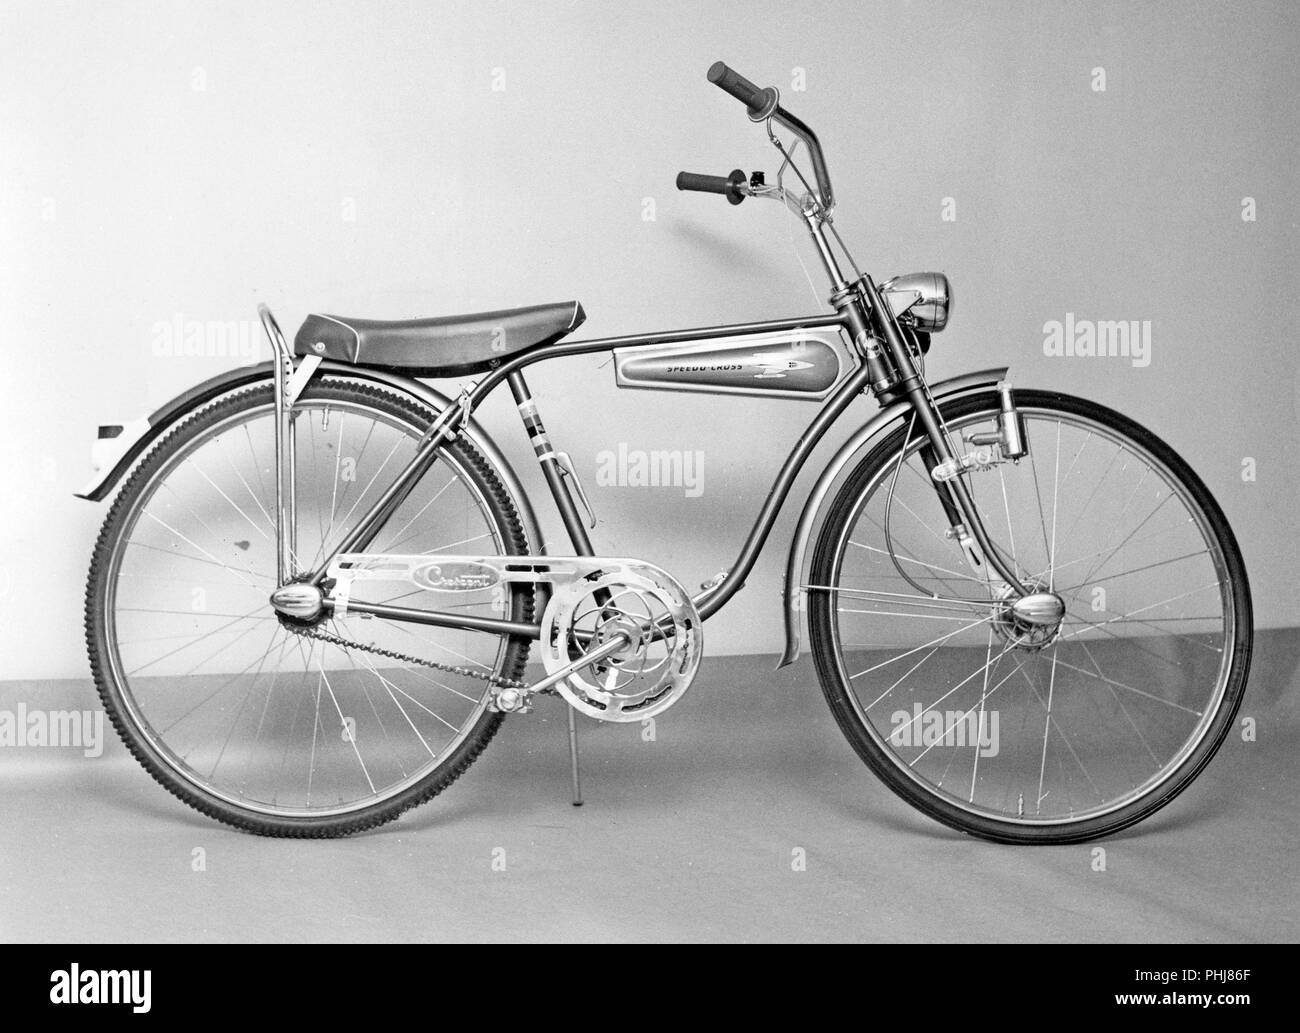 1950s bicycle. A childrens bicycle model Speed Cross  Crescent. A design with the space age in mind and a rocket pictured on the design tank. A model that was considered the coolest thing around for a child of the 1950s with high handlebars, front drum break and a loaf seat. Sweden 1956 ref CV15-9 Stock Photo